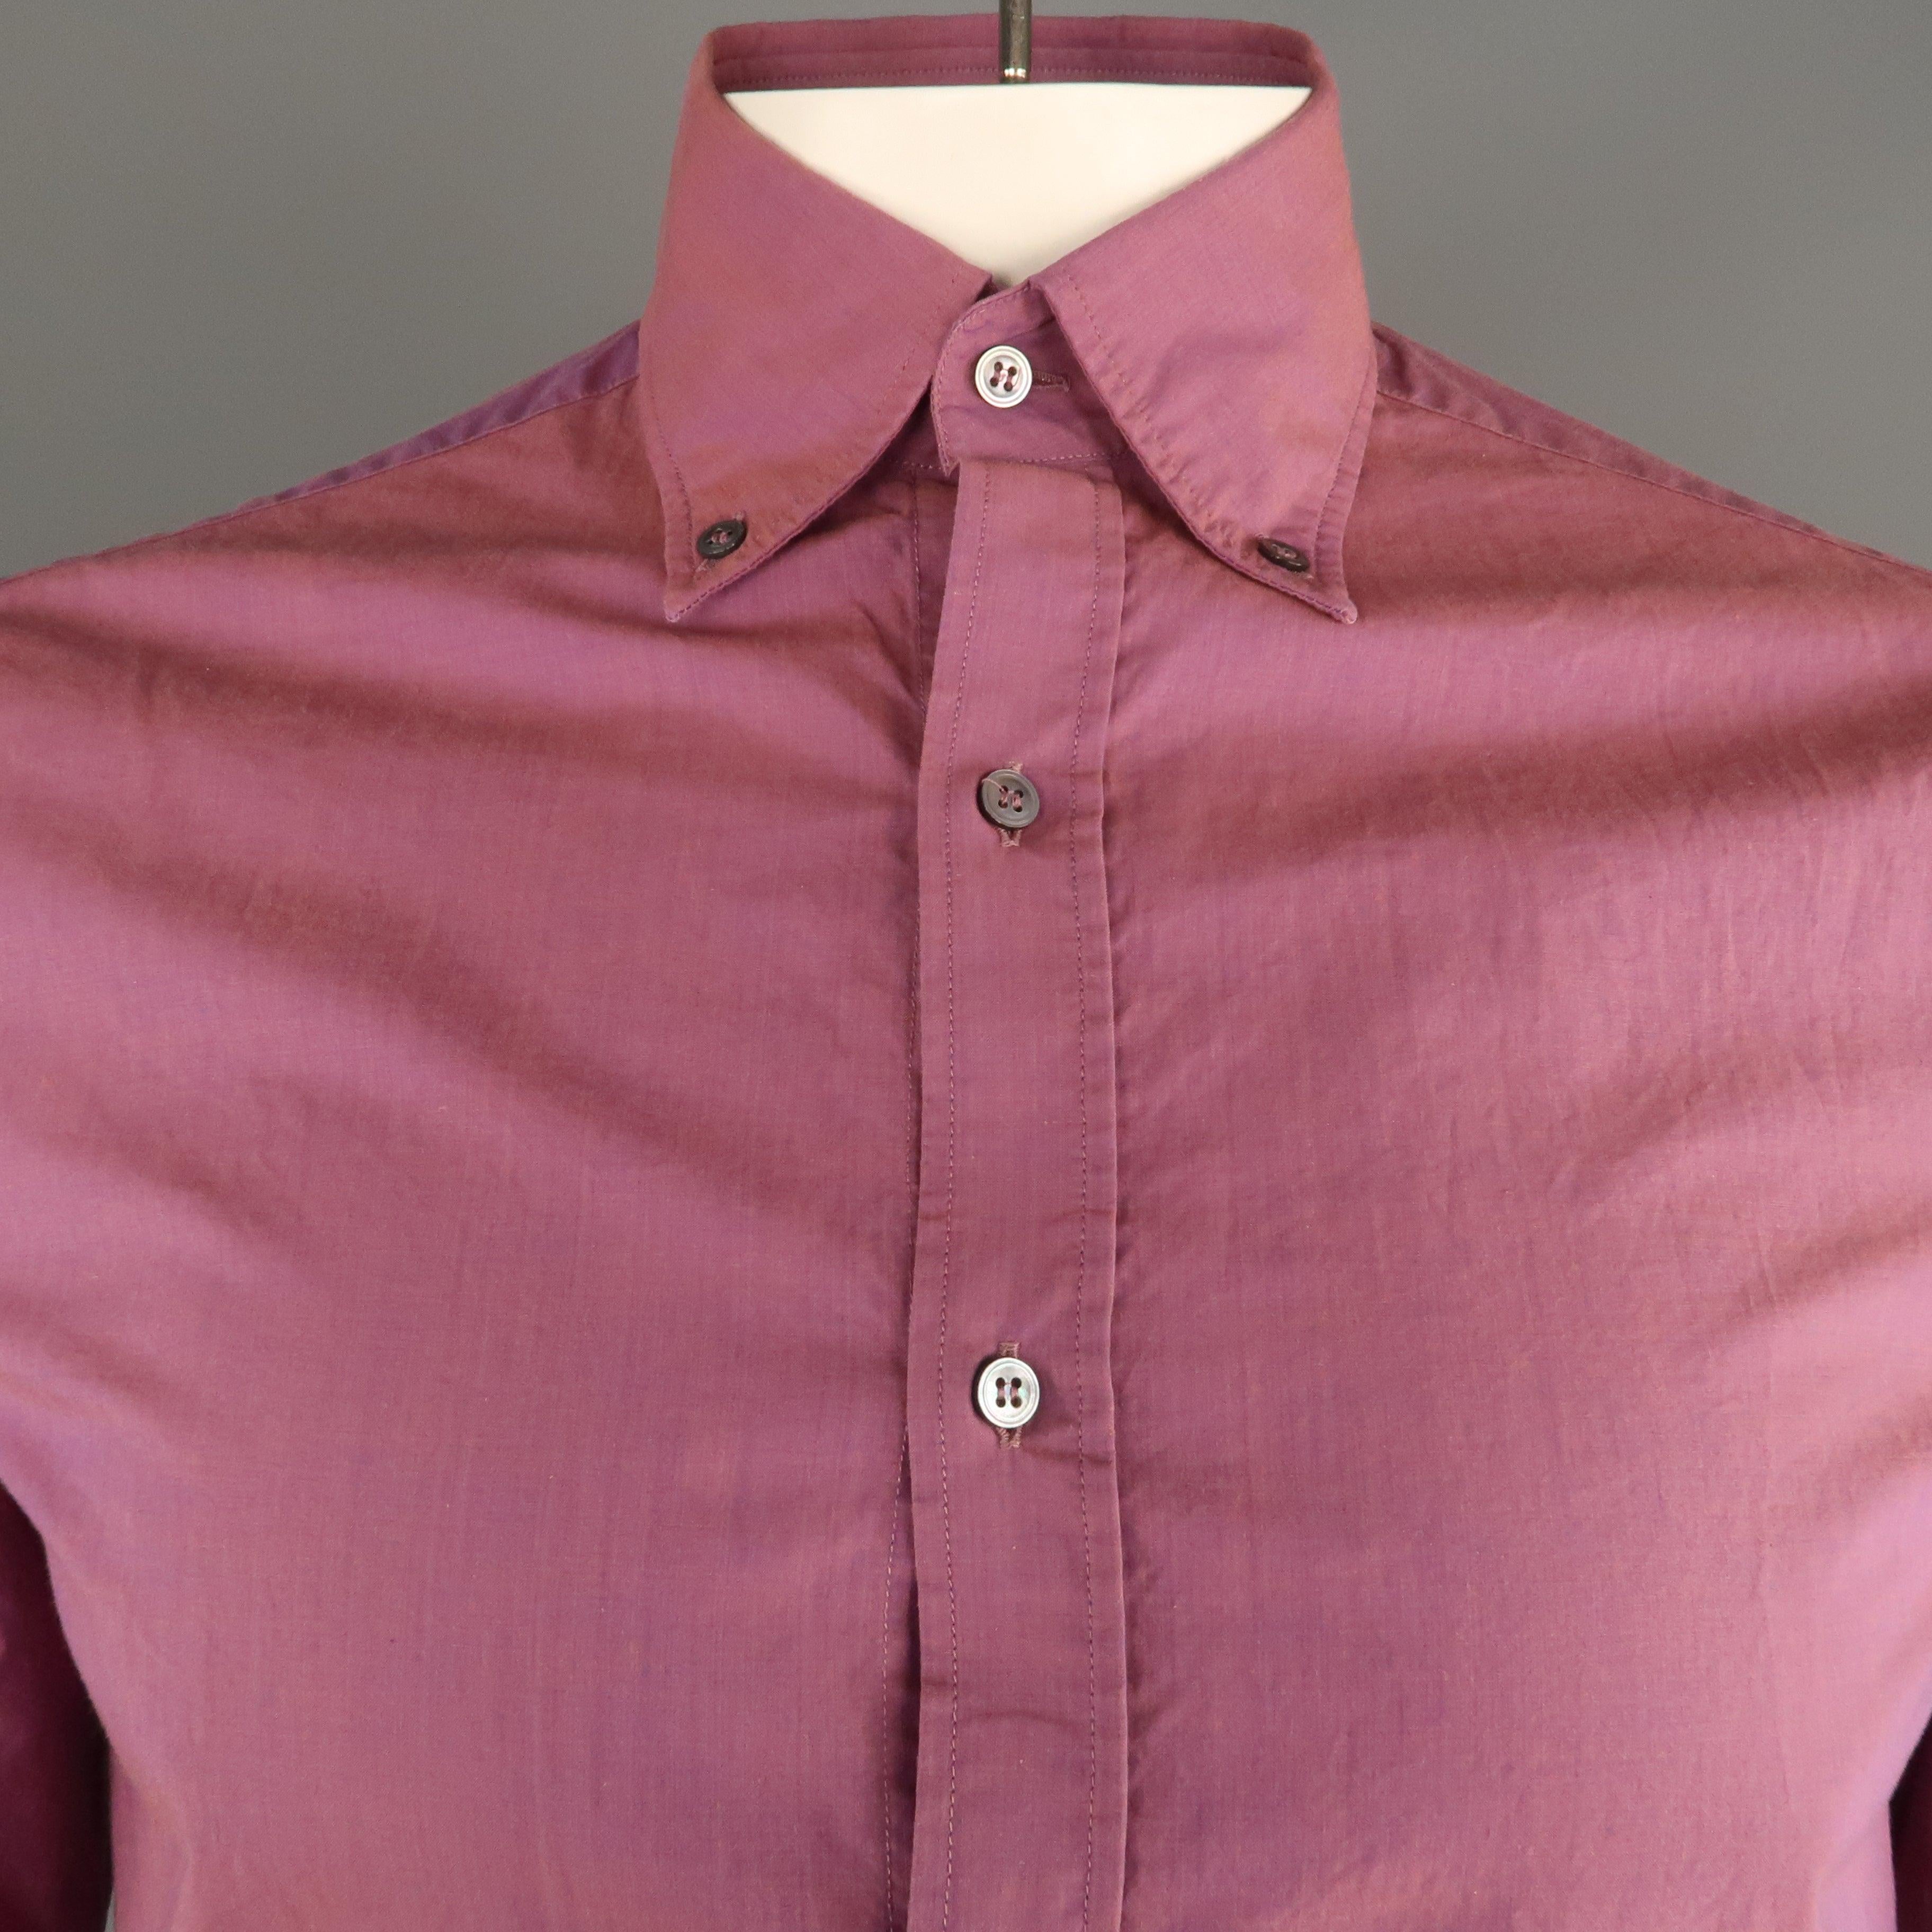 MICHAEL BASTIAN long sleeve shirt comes in a magenta cotton featuring a button-down collar. Comes with tag. Made in Italy.
Very Good Pre-Owned Condition.
 

Marked:   39/15.5
 

Measurements: 
  
l	Shoulder: 
18.5 inches  
l	Chest: 42 inches 